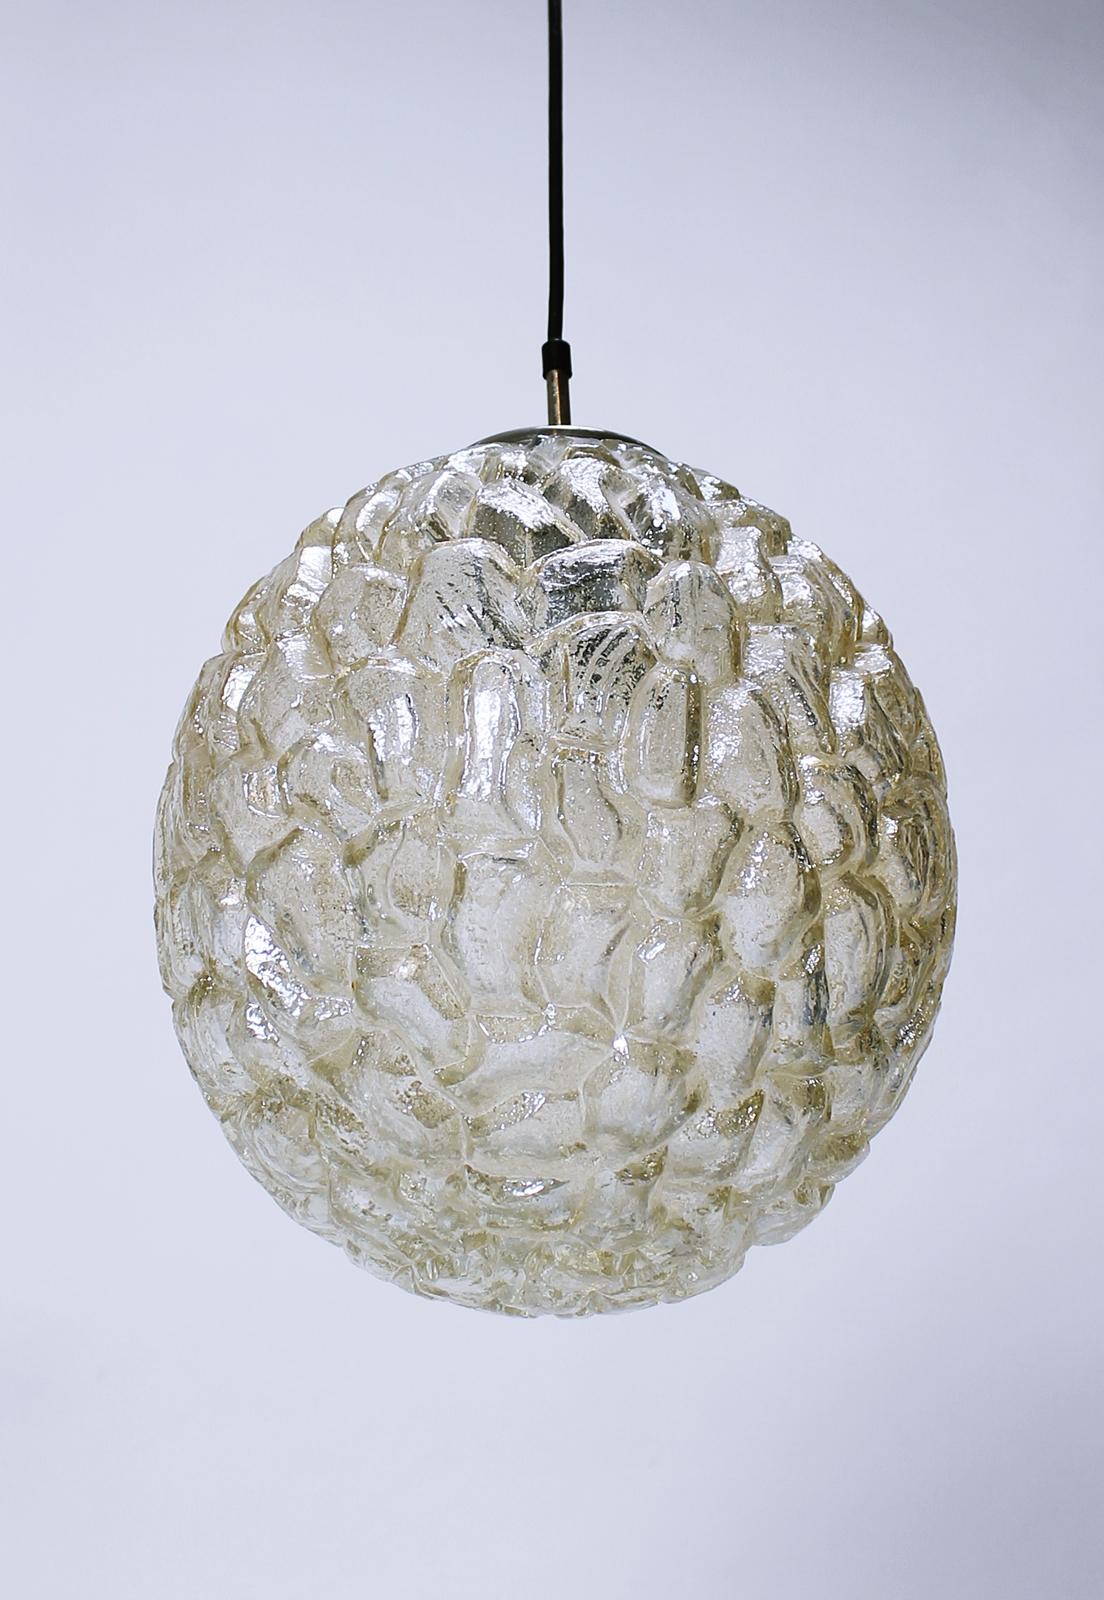 A beautiful and large oval shaped pendant light fixture by Glashütte Limburg, circa 1970s. Featuring a wonderful textured amber colored toned glass shade resembling ice crystals, this midcentury vintage lamp illuminates beautifully, casting a golden